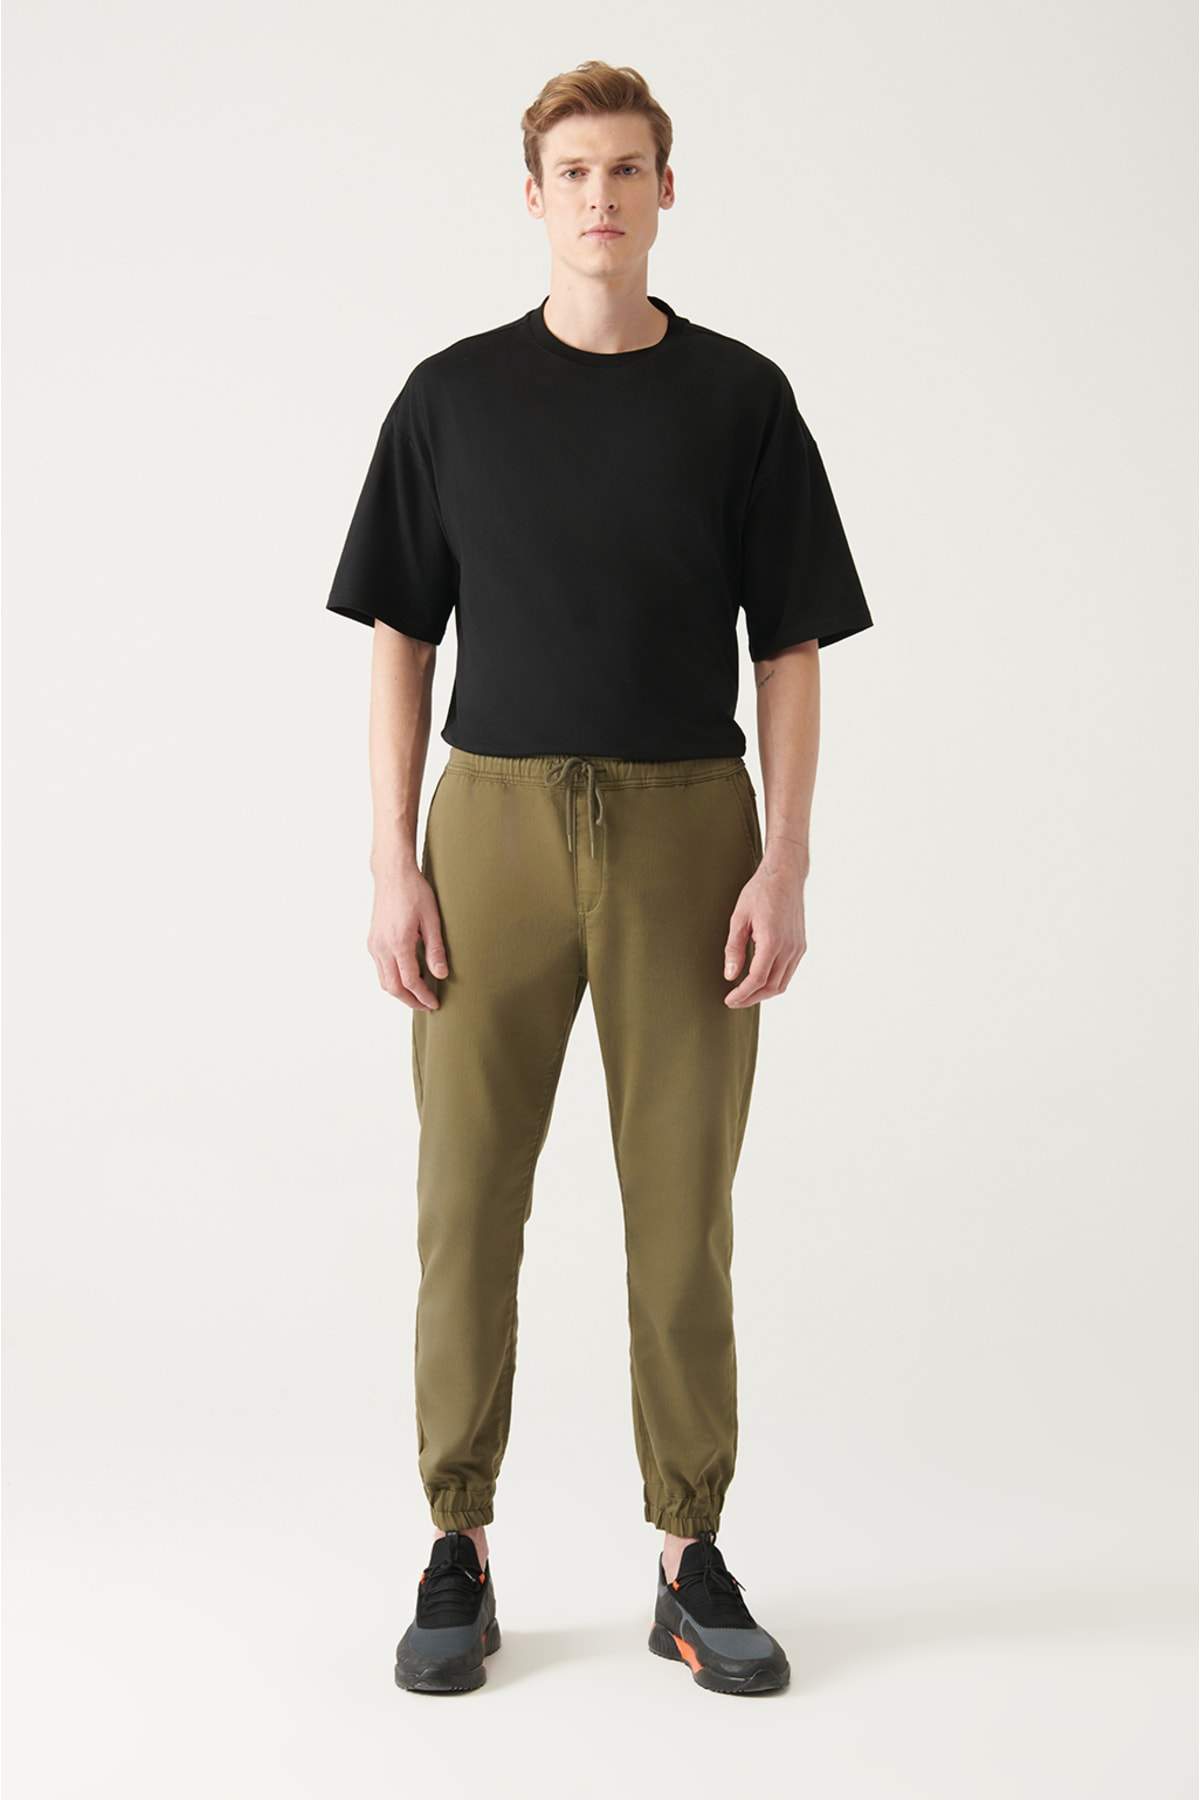 mens-khaki-side-pocket-knitted-lace-up-relaxed-fit-casual-fit-jogger-pants